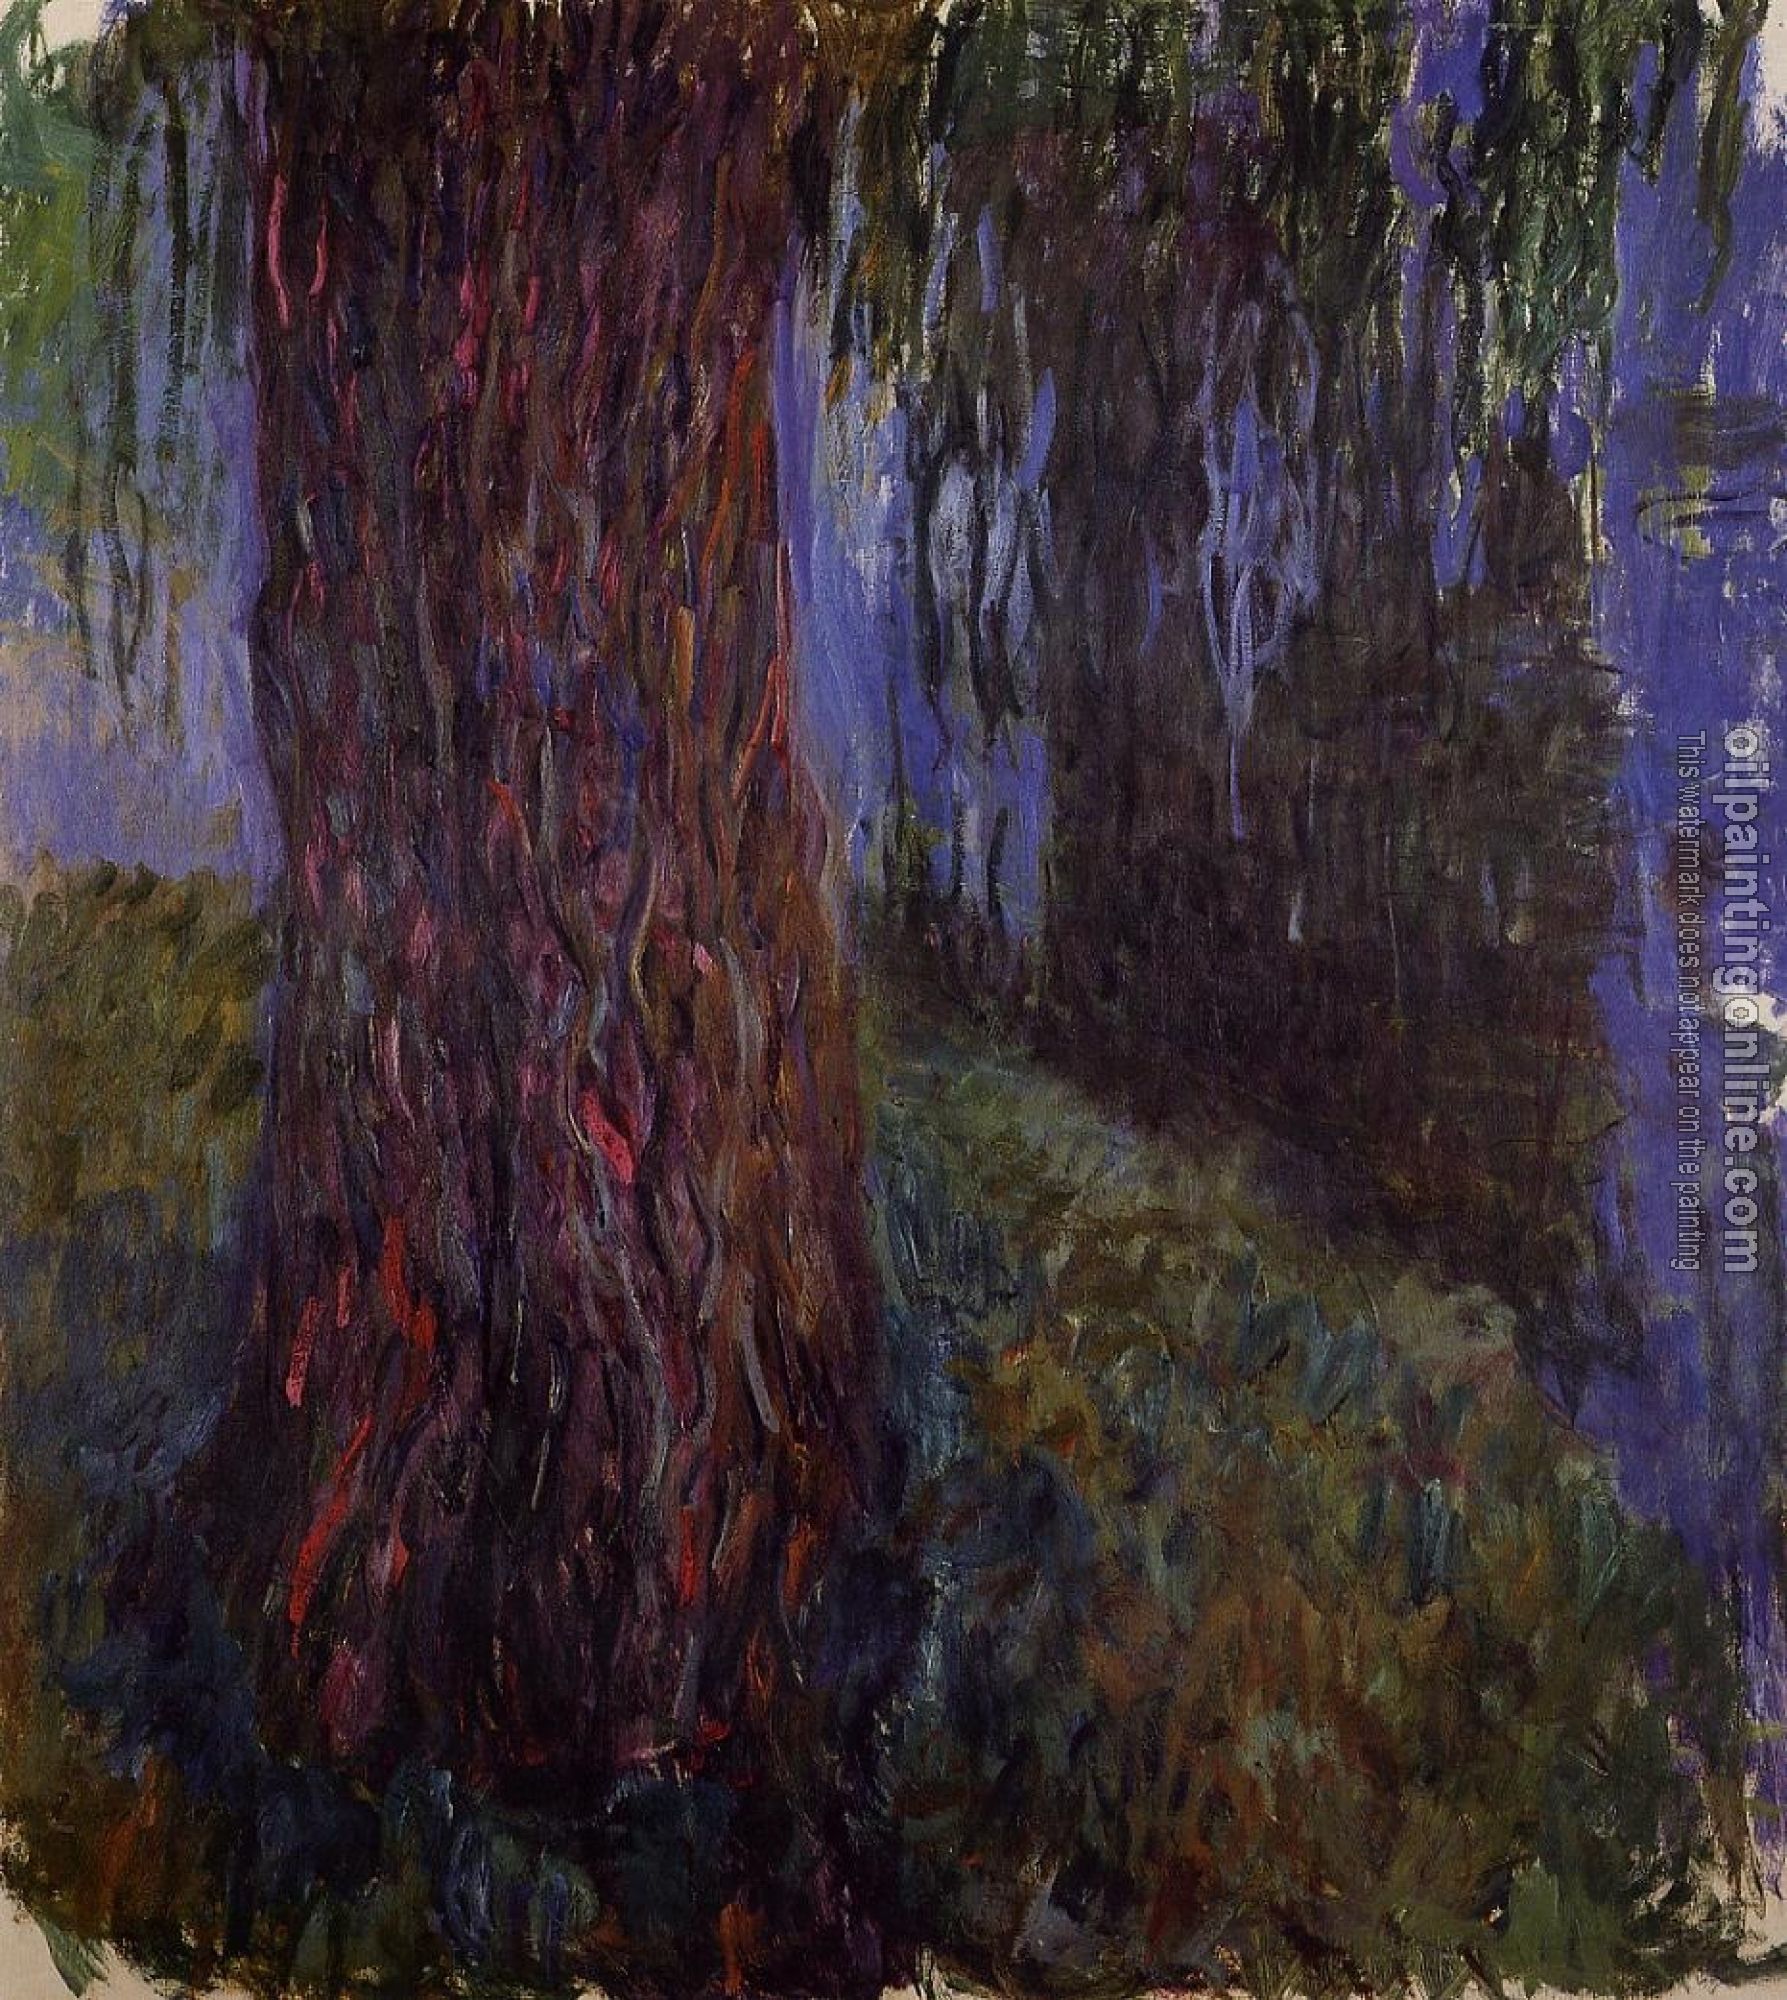 Monet, Claude Oscar - Water-Lily Garden with Weeping Willow